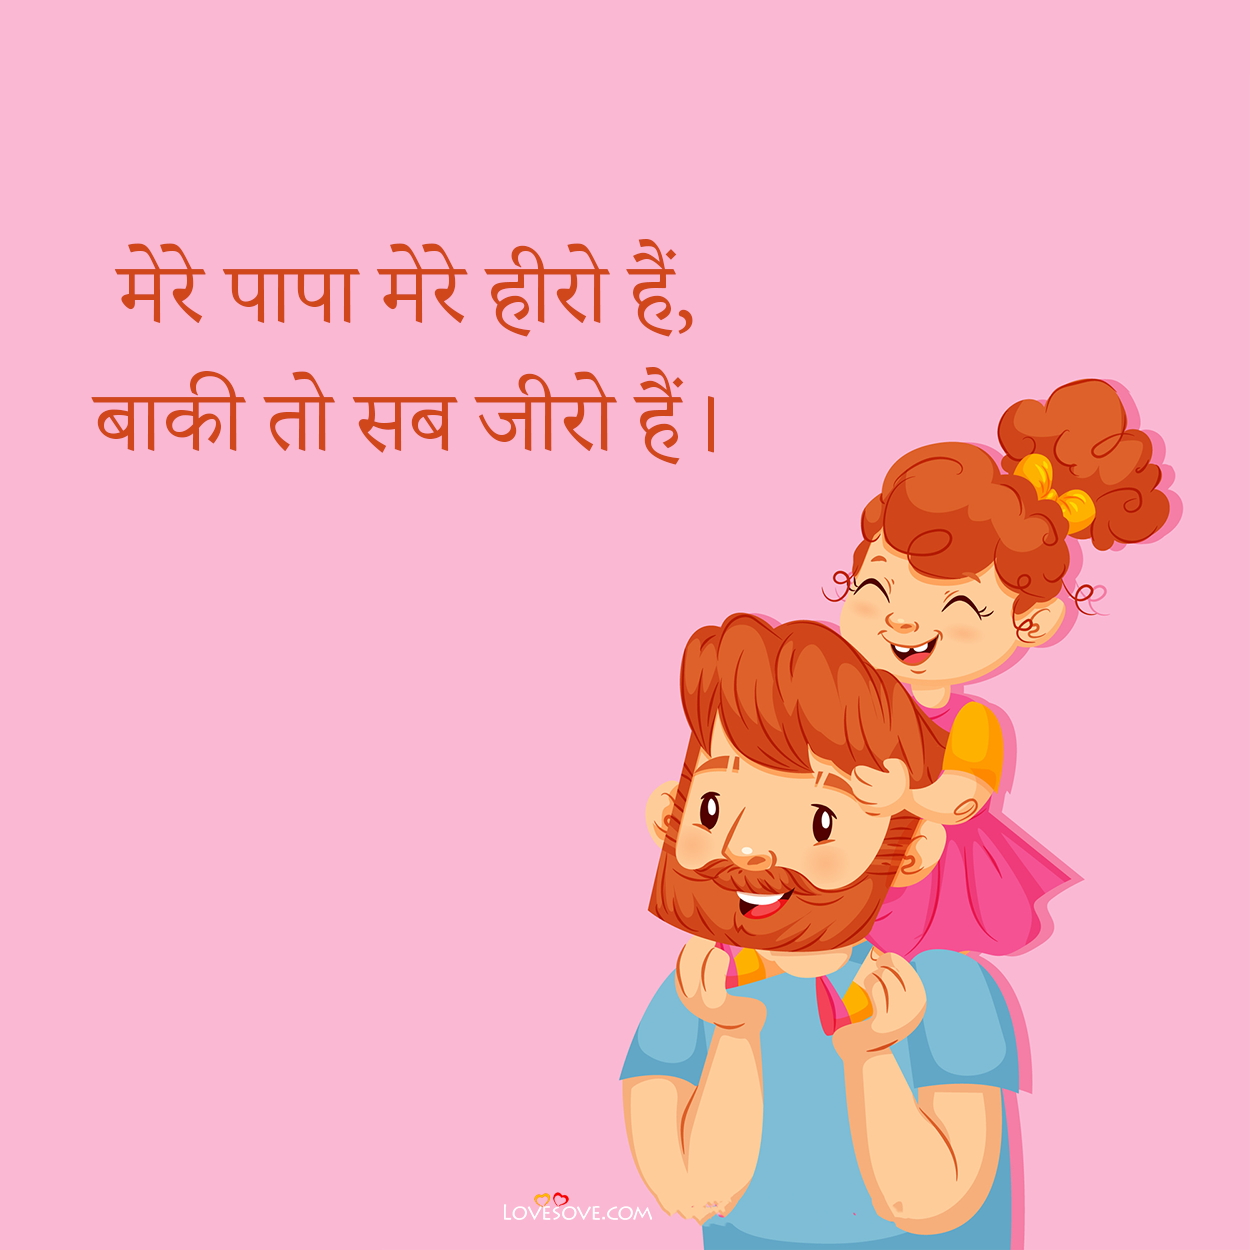 father daughter quotes in hindi, funny father daughter quotes in hindi